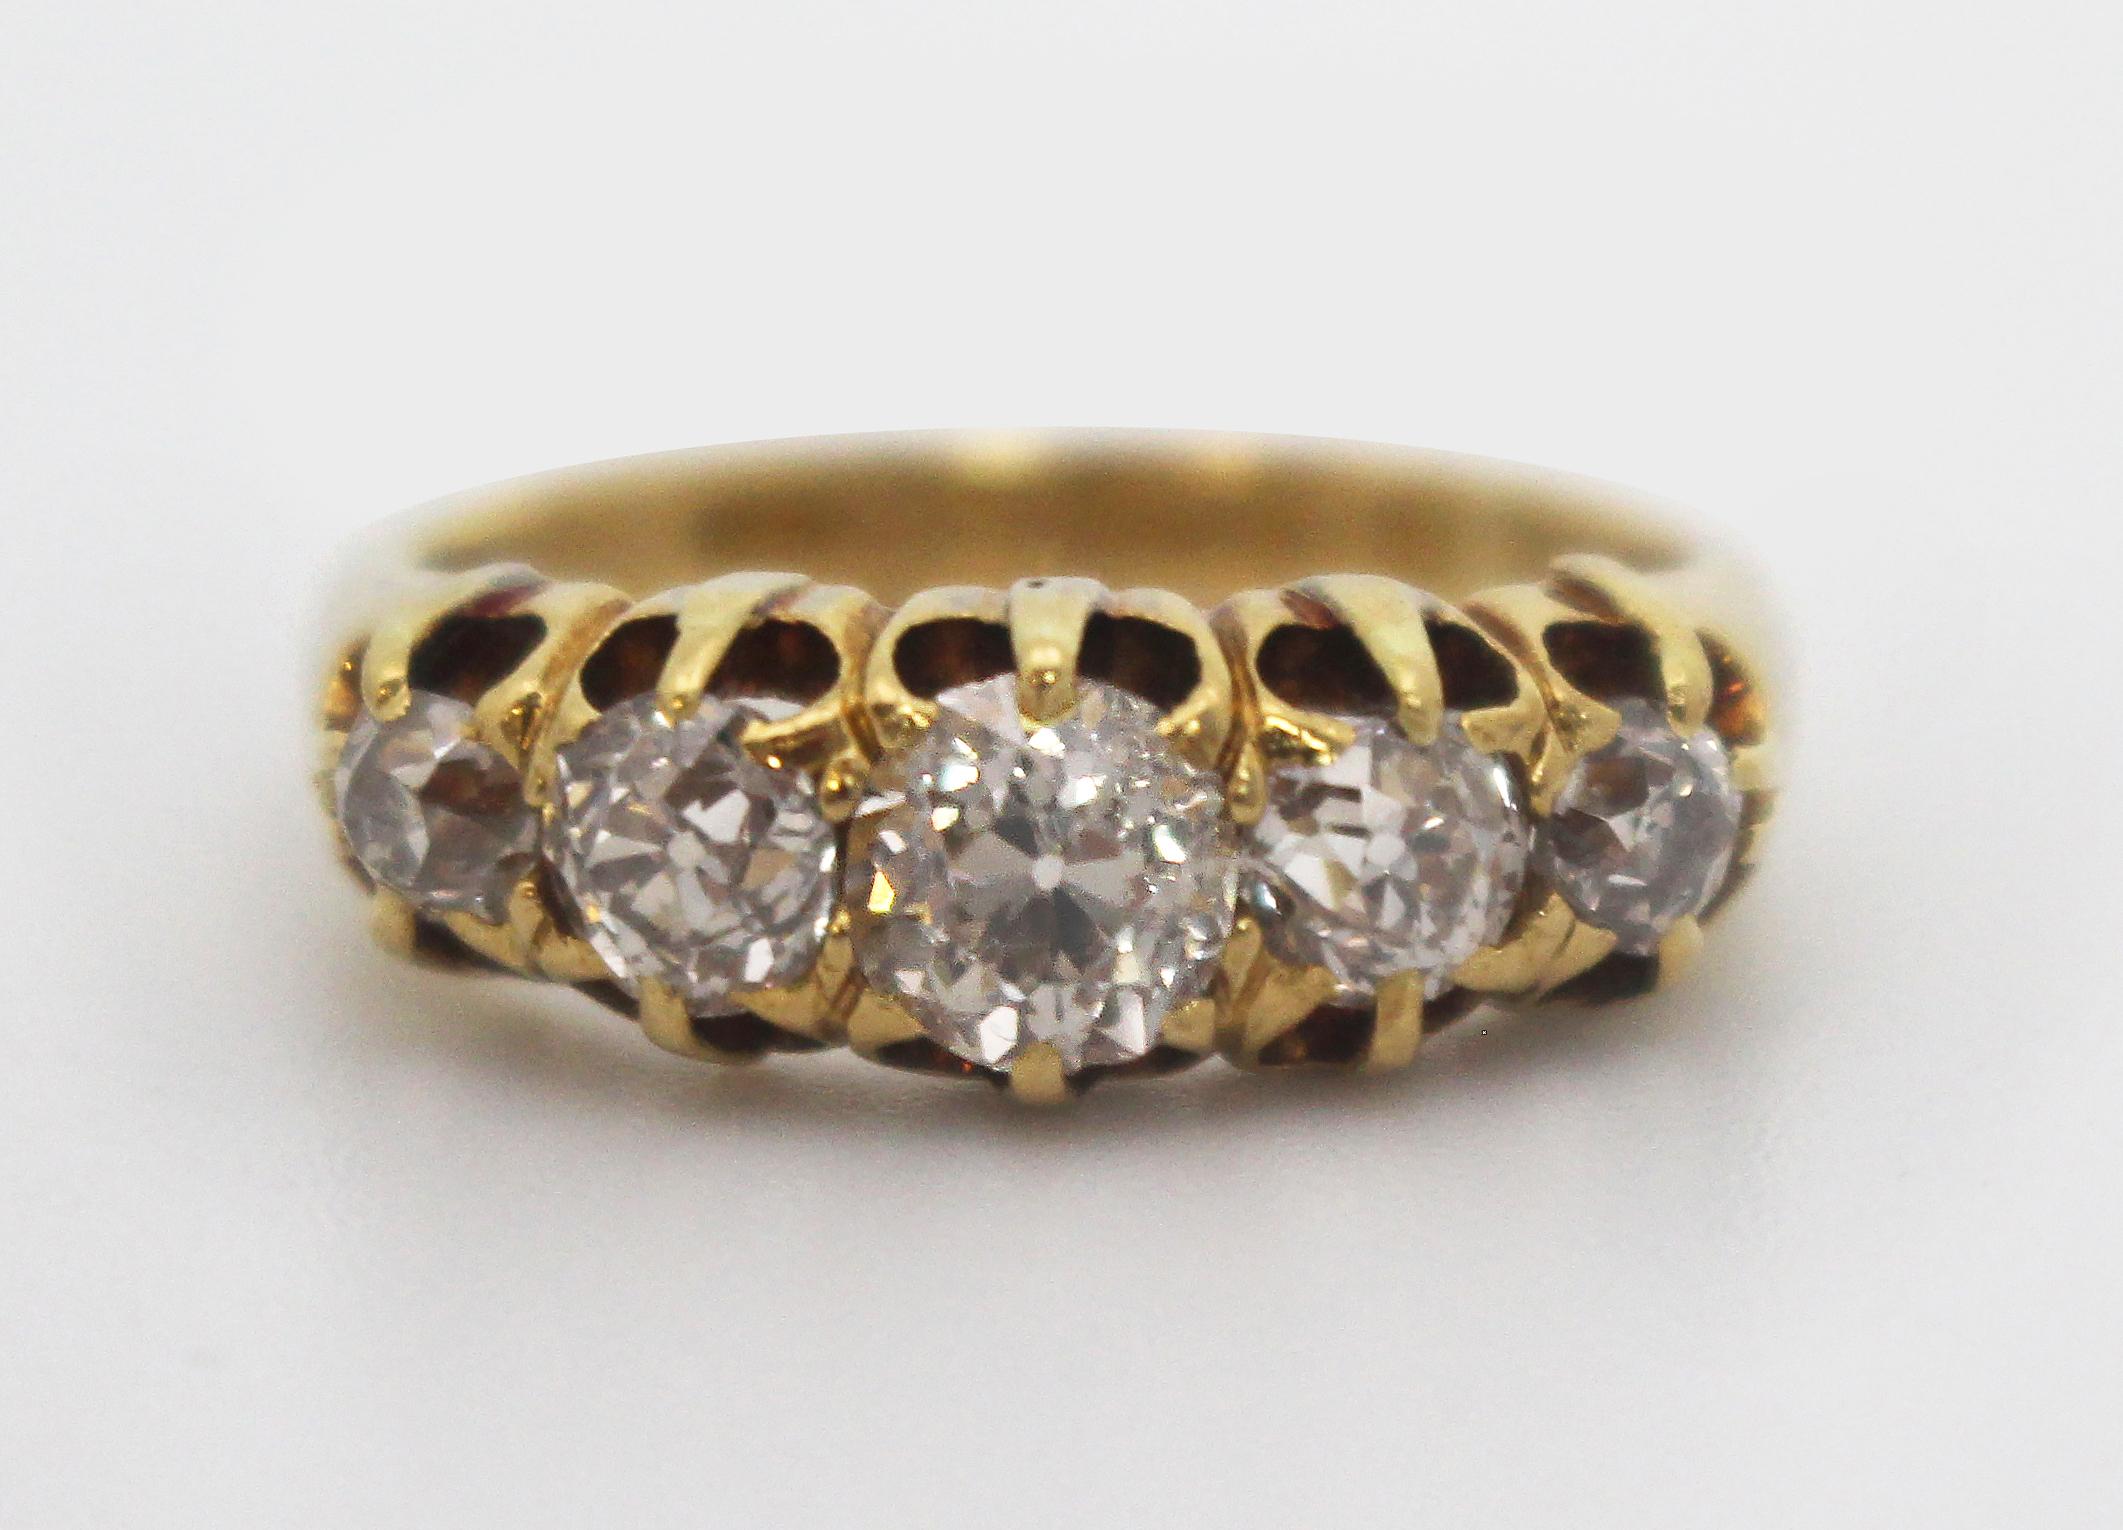 19th c. Five stone diamond ring 18ct gold


Late 19th c., English

Stone five graduating sized claw set old European cut diamonds. Total diamond weight 1.67 carat, Colour assessed as G-I, clarity assessed as SI1-SI2

Ring 18ct gold.